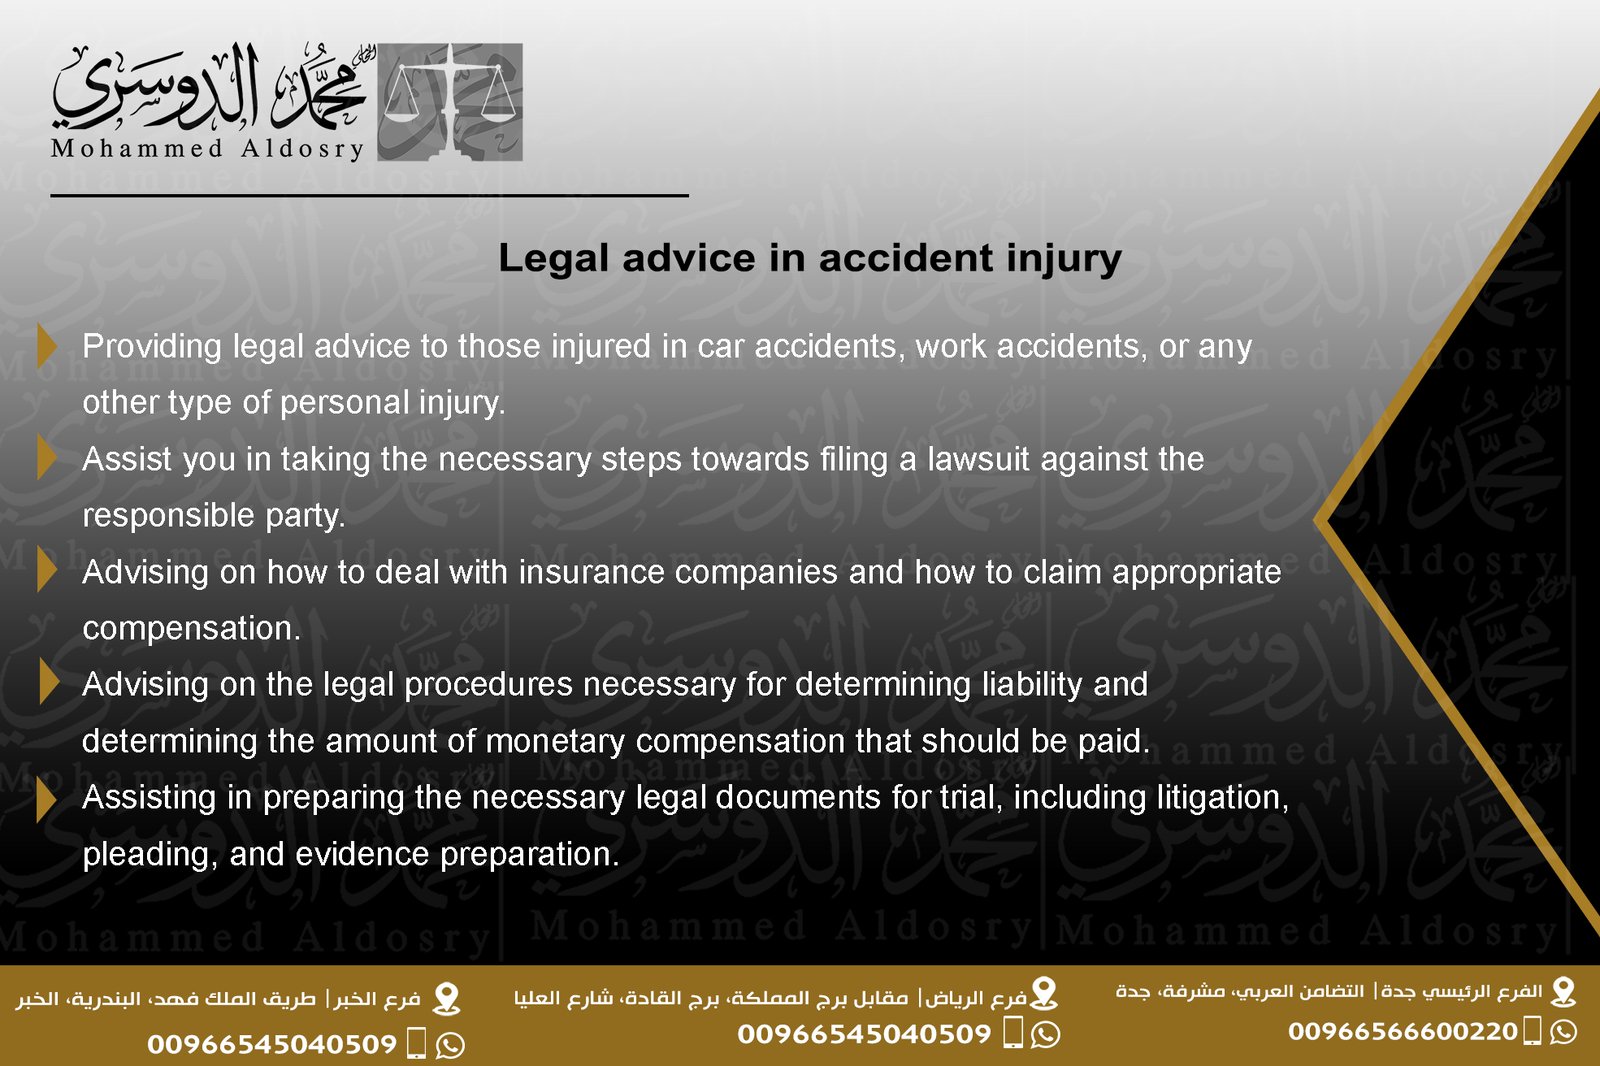 Legal advice in accident injury